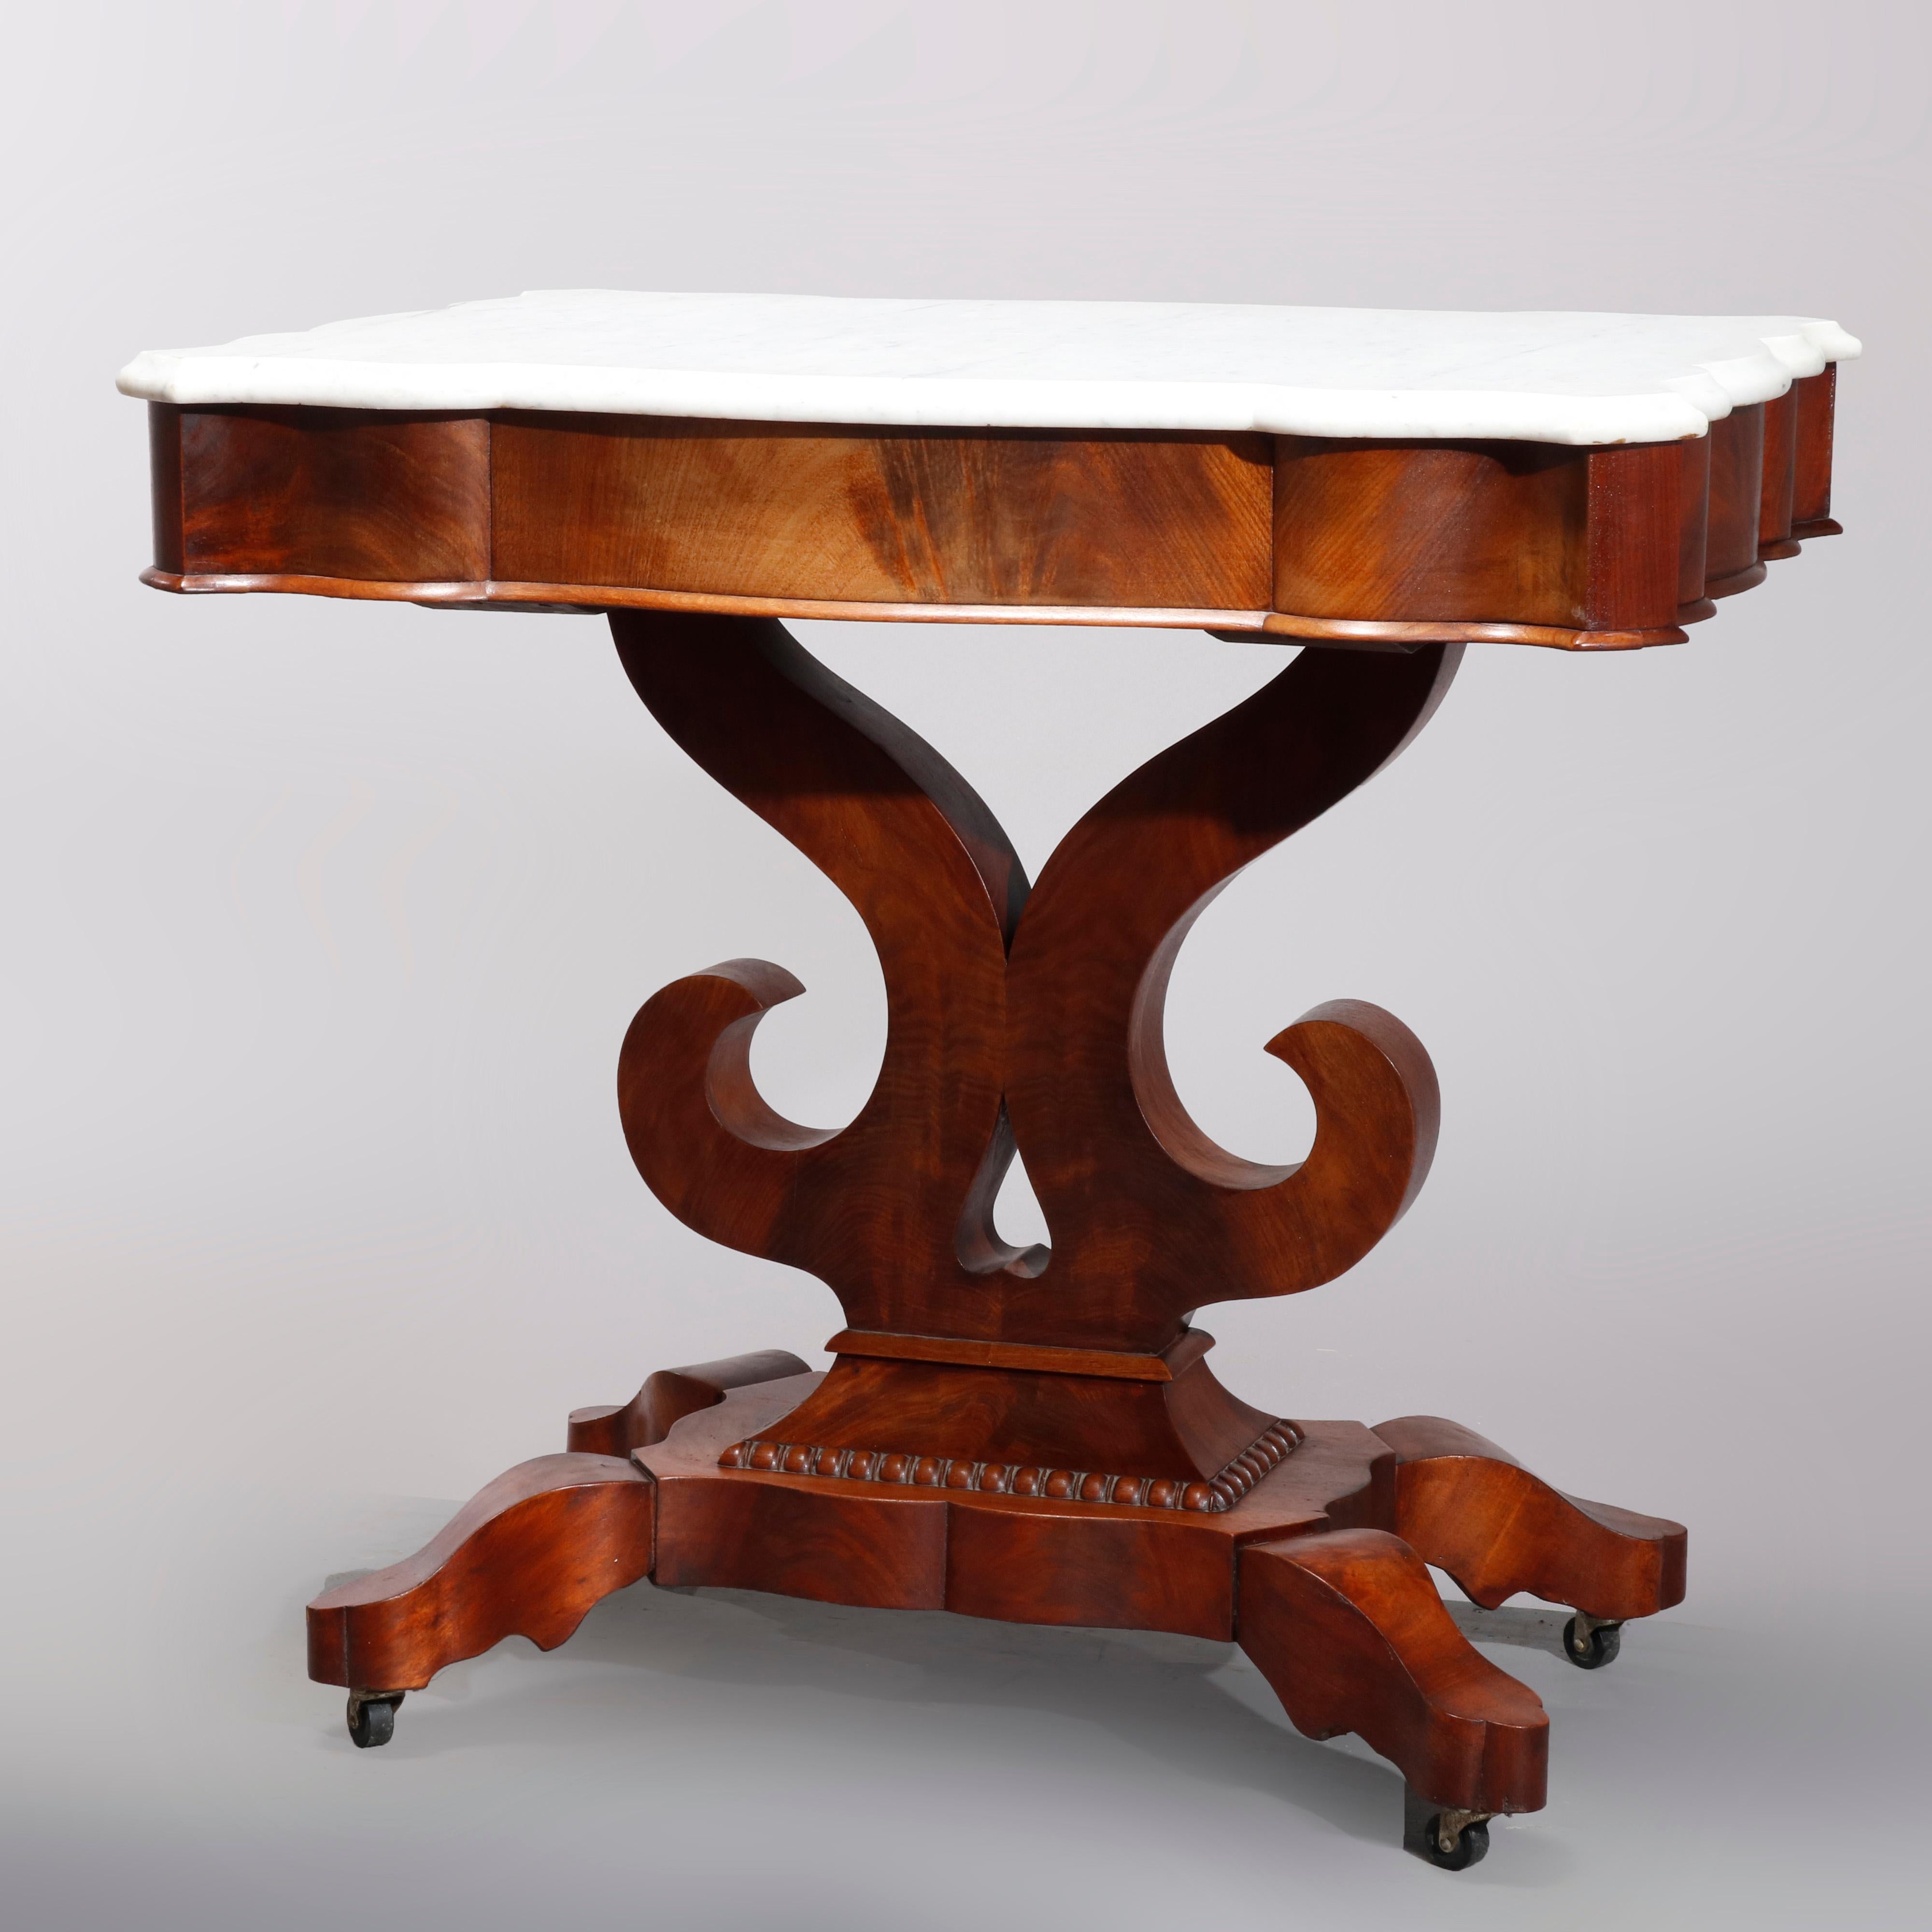 An antique American Empire turtle top center table in the manner of Quervelle offers shaped marble top surmounting flame mahogany base having deep skirt over scroll form plinth raised on four stylized cabriole legs with casters, circa